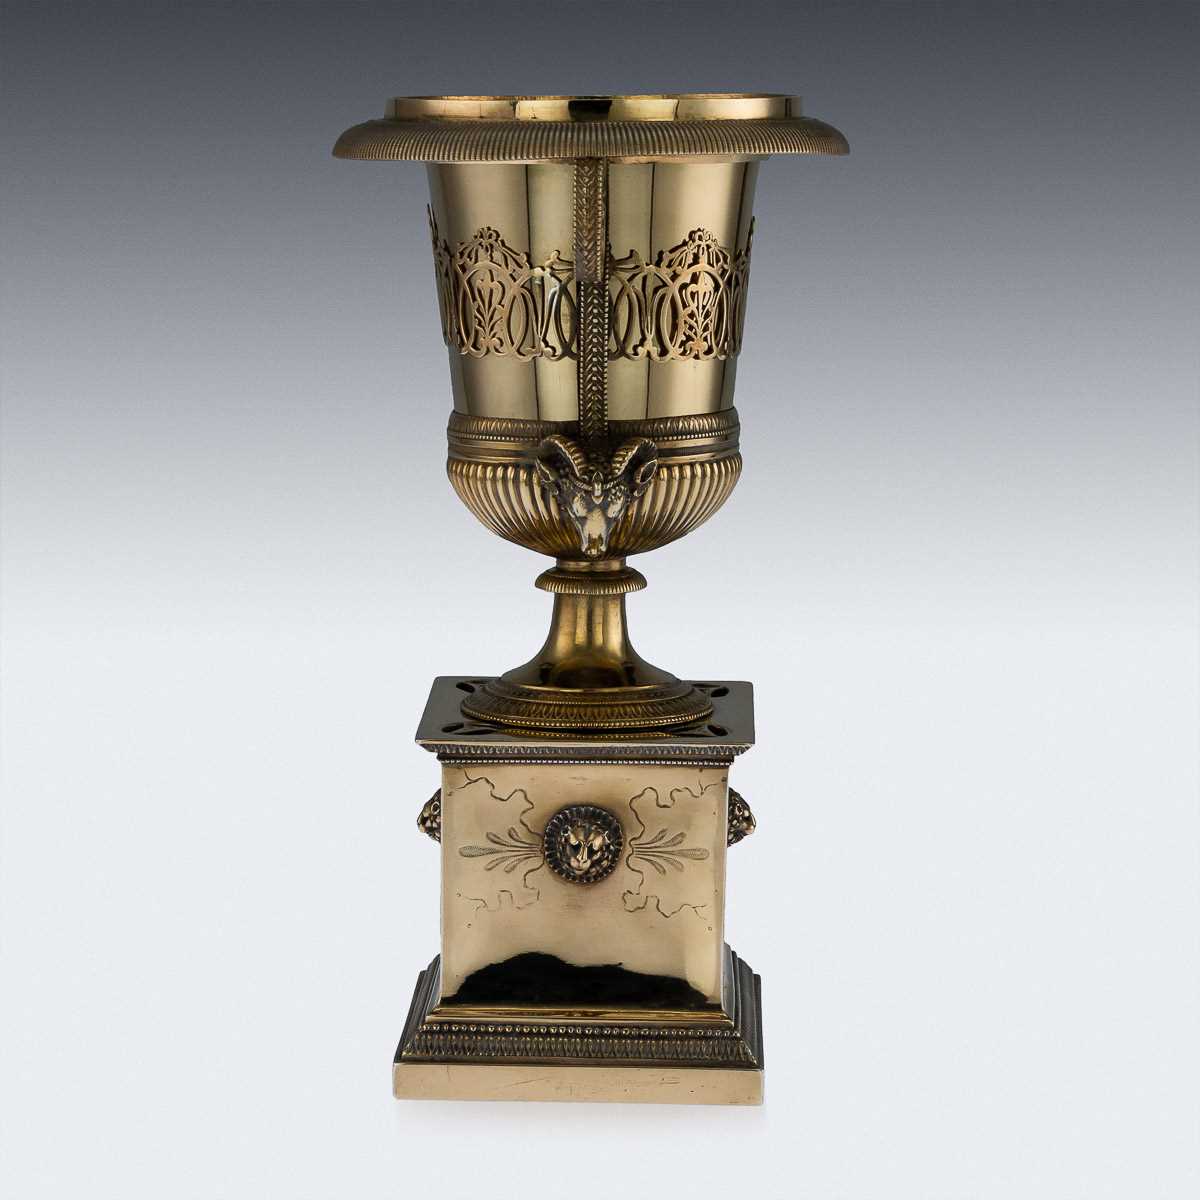 AN EARLY 19TH CENTURY SILVER GILT URN BY MARC JACQUART, PARIS - Image 3 of 19